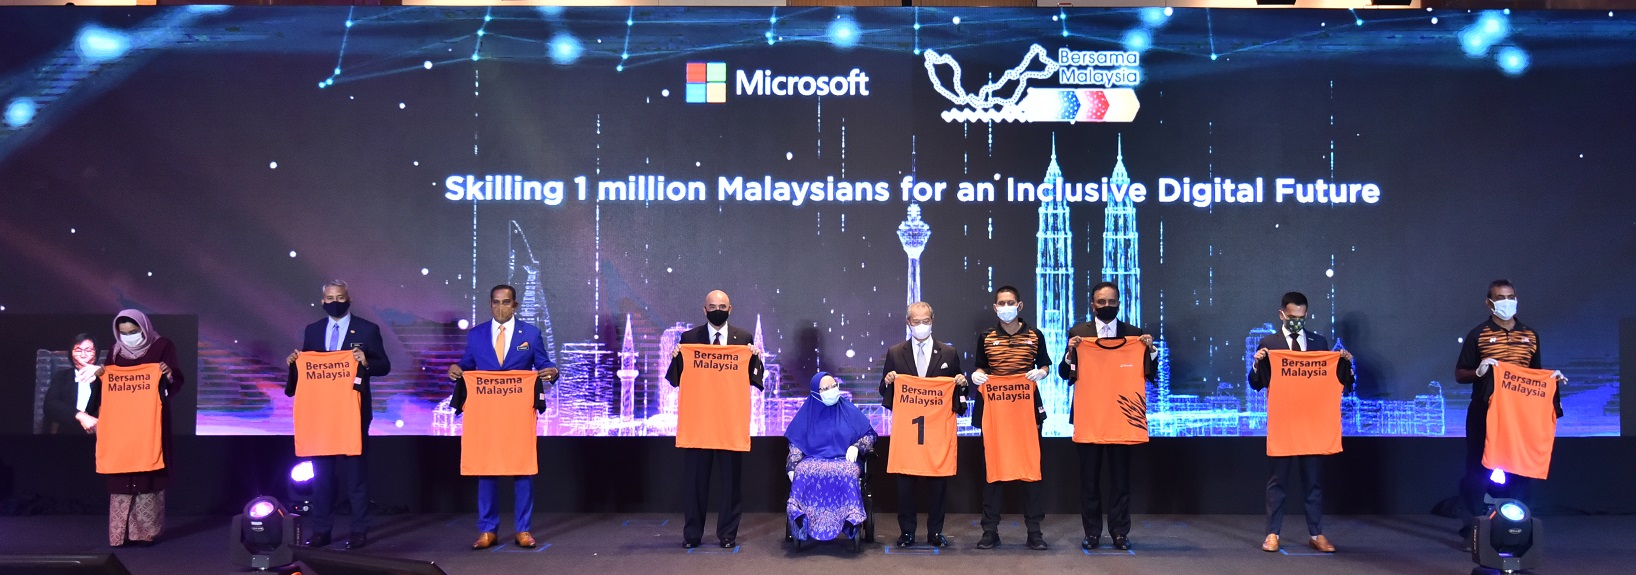 “Bersama Malaysia” initiative also includes Public-private Partnerships to skill an additional 1 million Malaysians by end of 2023. Seen on-stage are members from National Blind Football team, Microsoft will work to digitally upskill them 